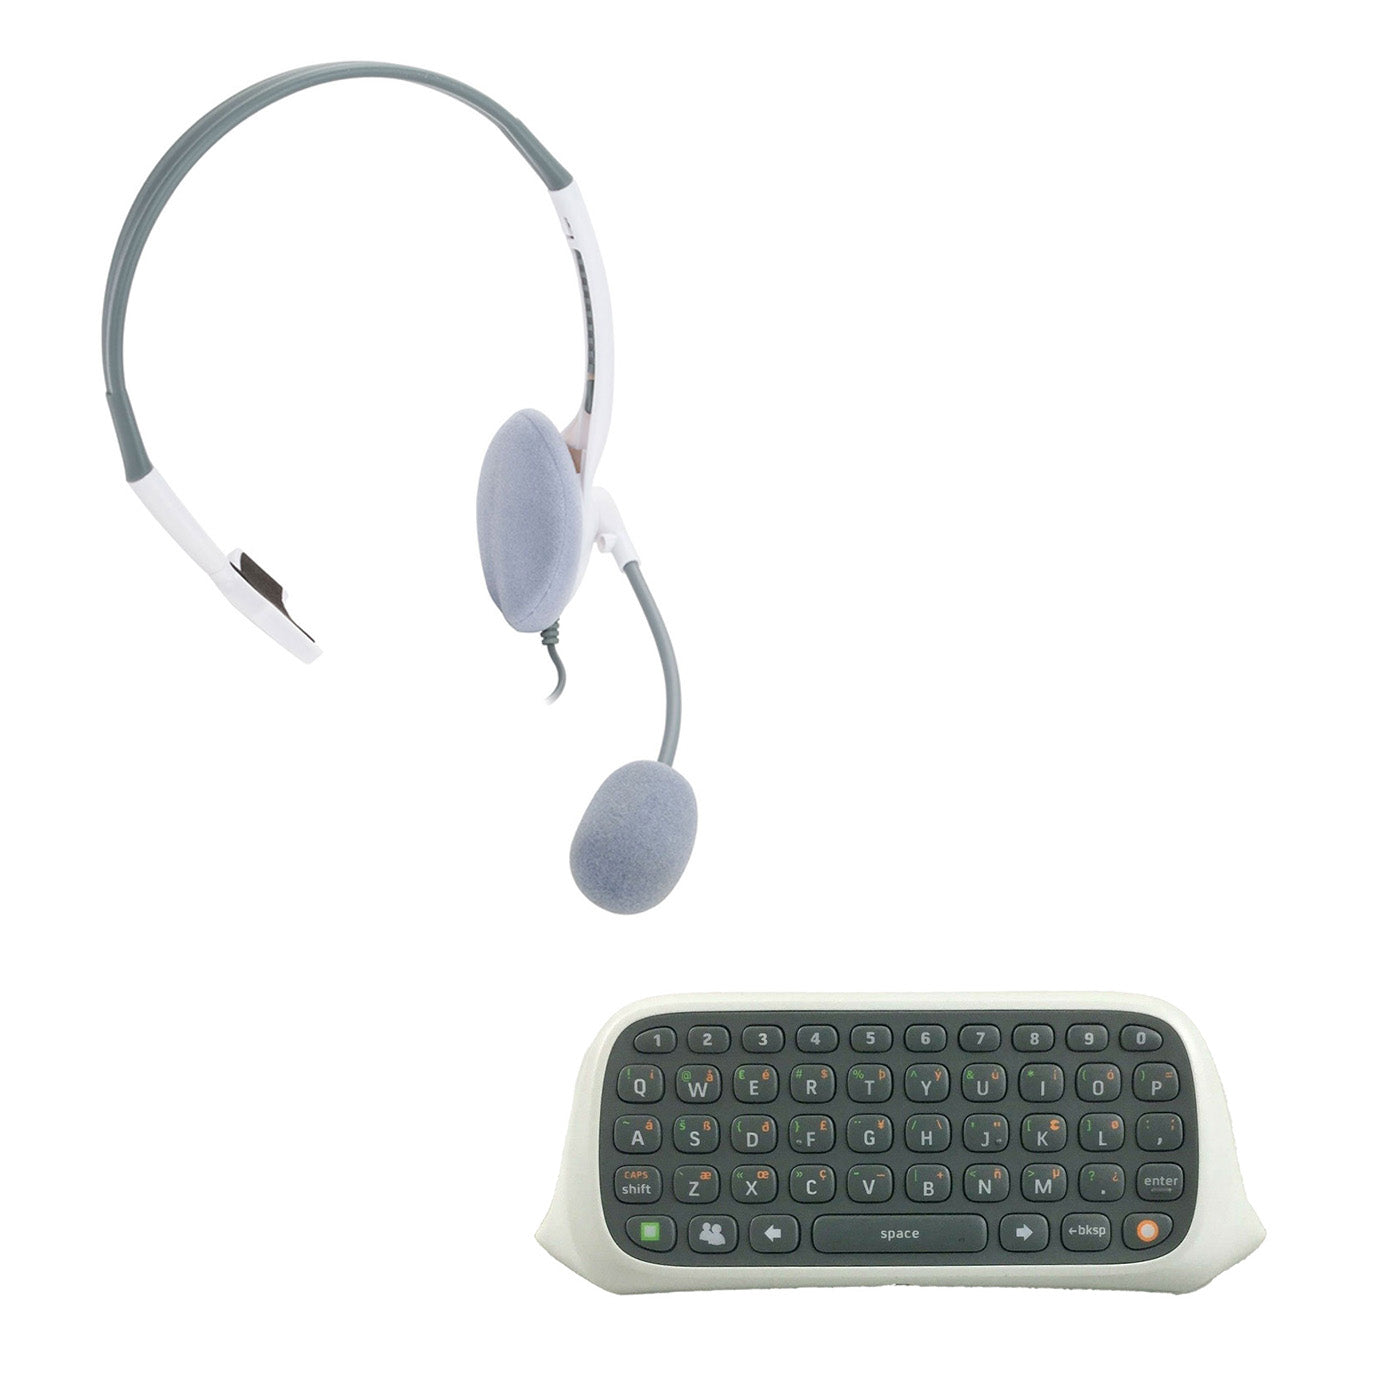 Microsoft Chatpad with Headset for Xbox 360